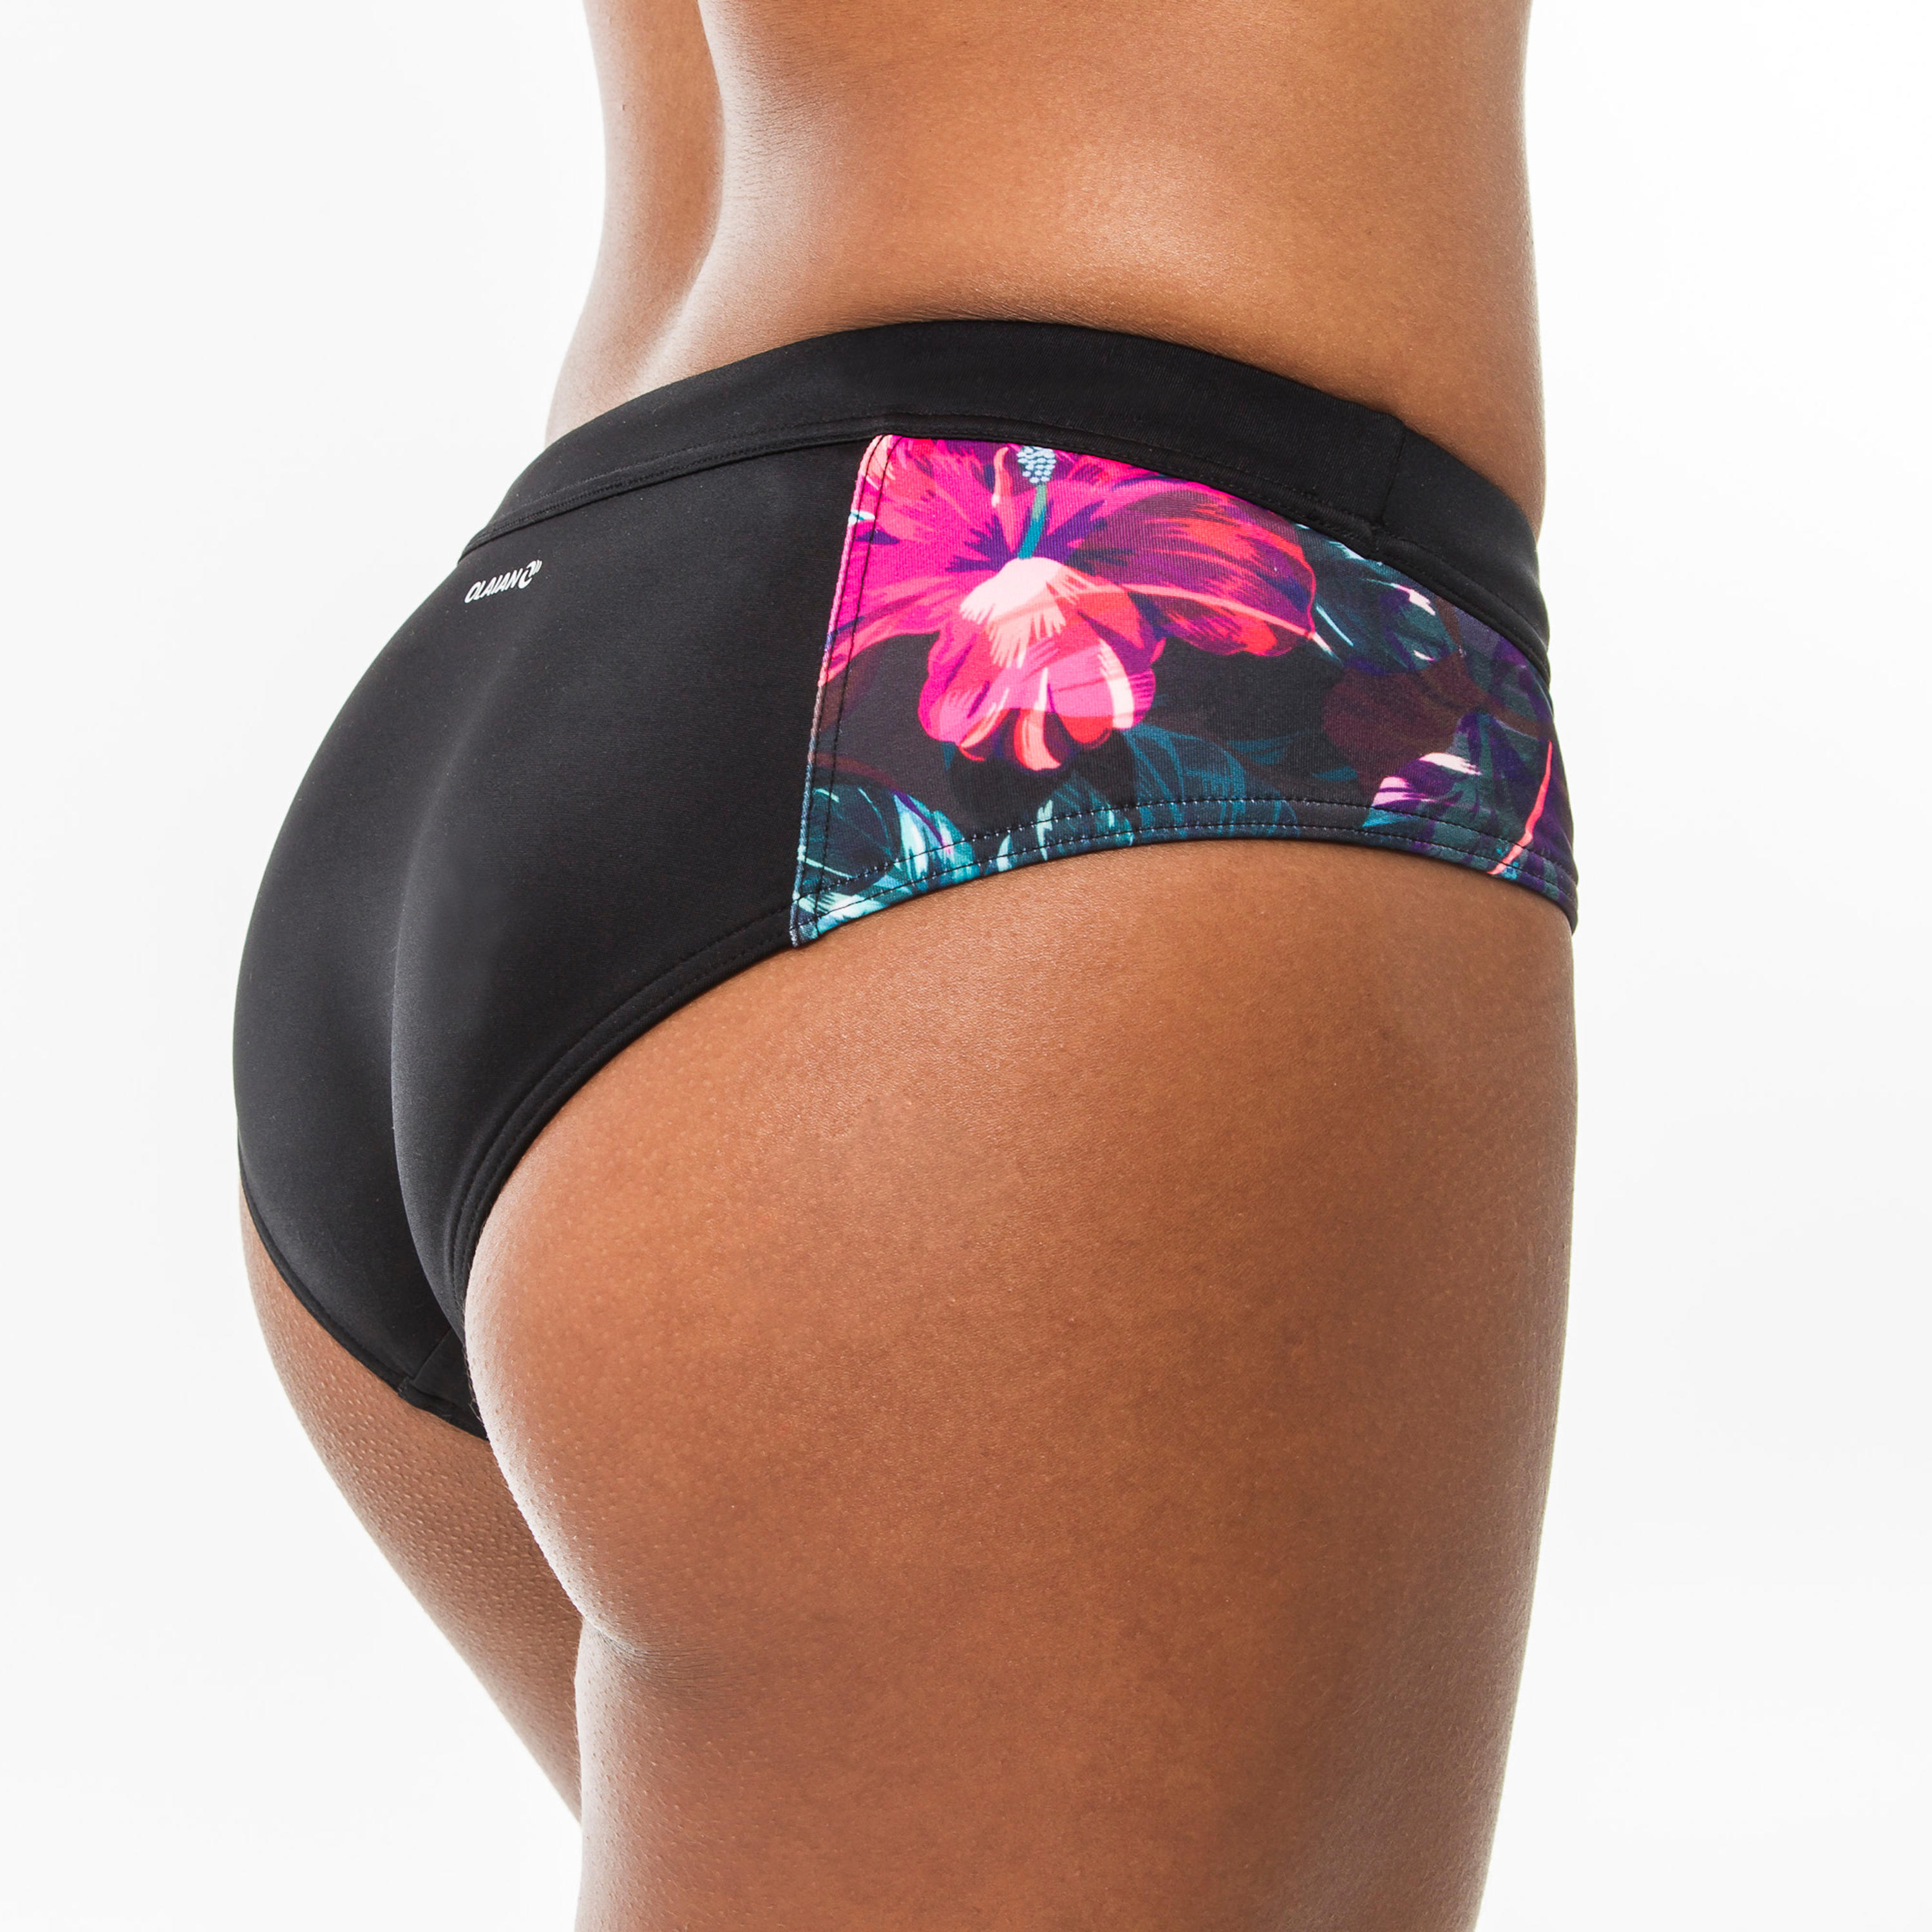 WOMEN'S Surfing Swimsuit Bottoms with Drawstring VALI FOAMY 4/10